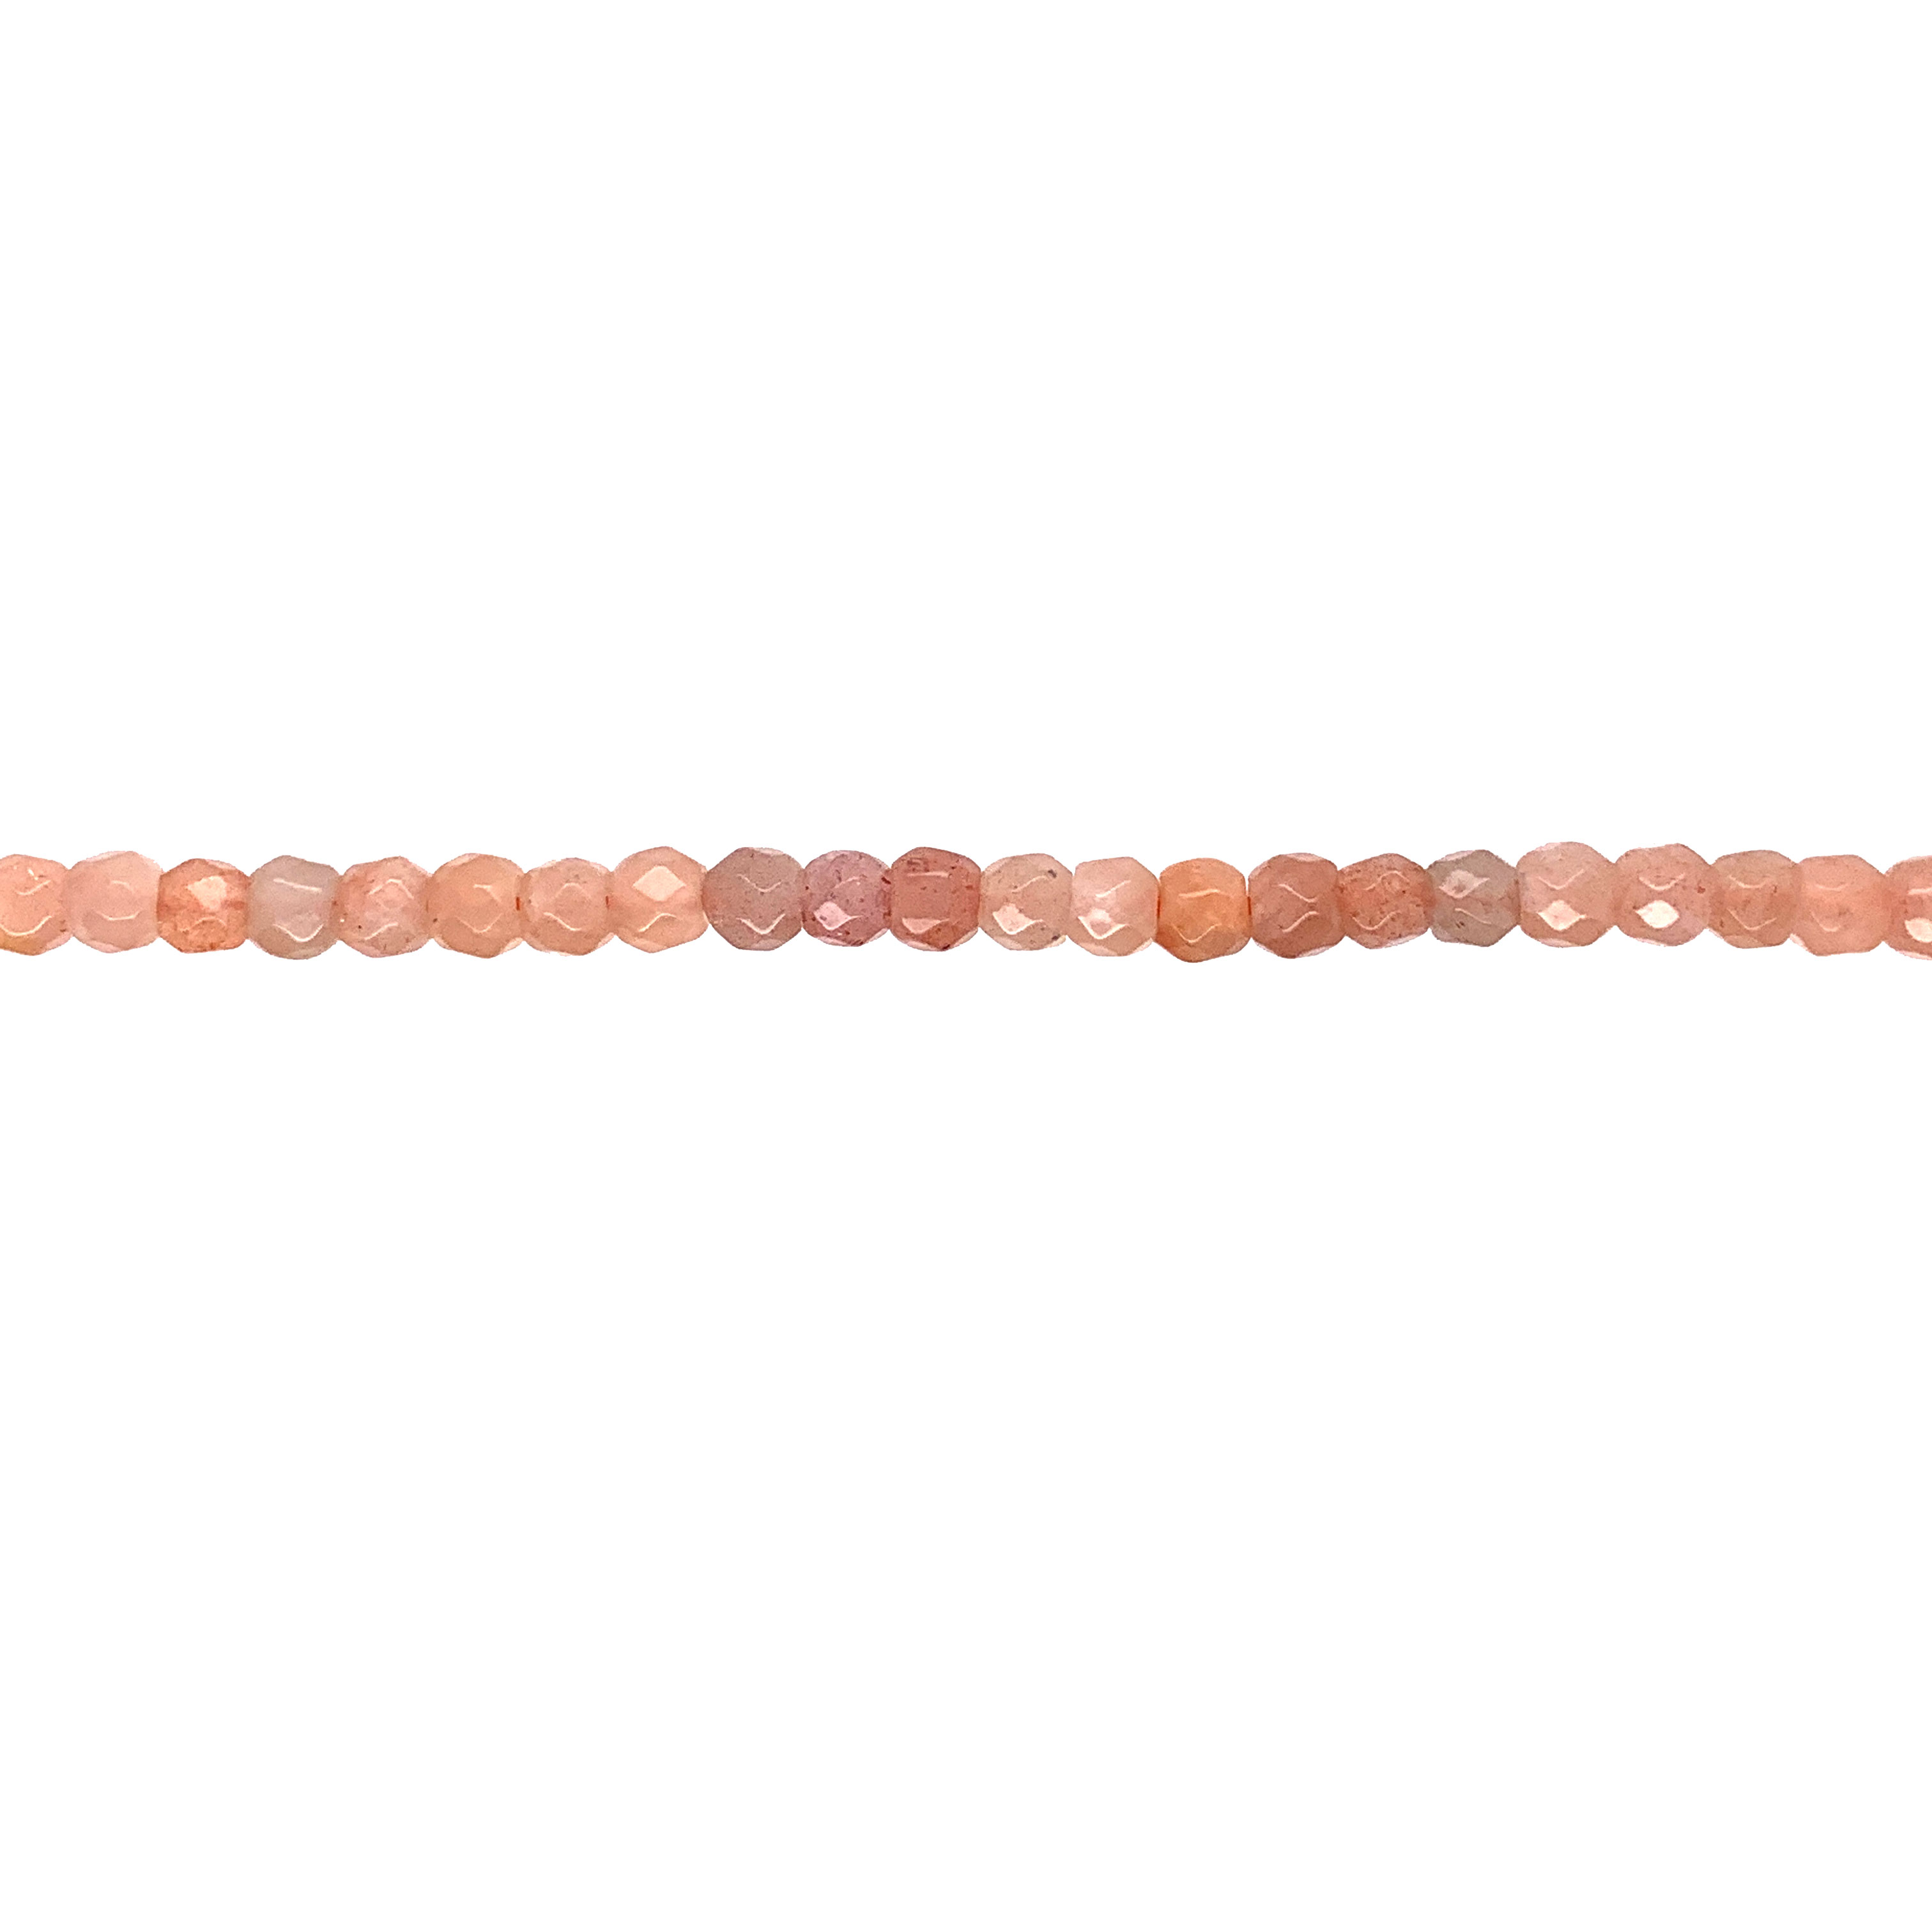 4mm Peach Moonstone - Faceted